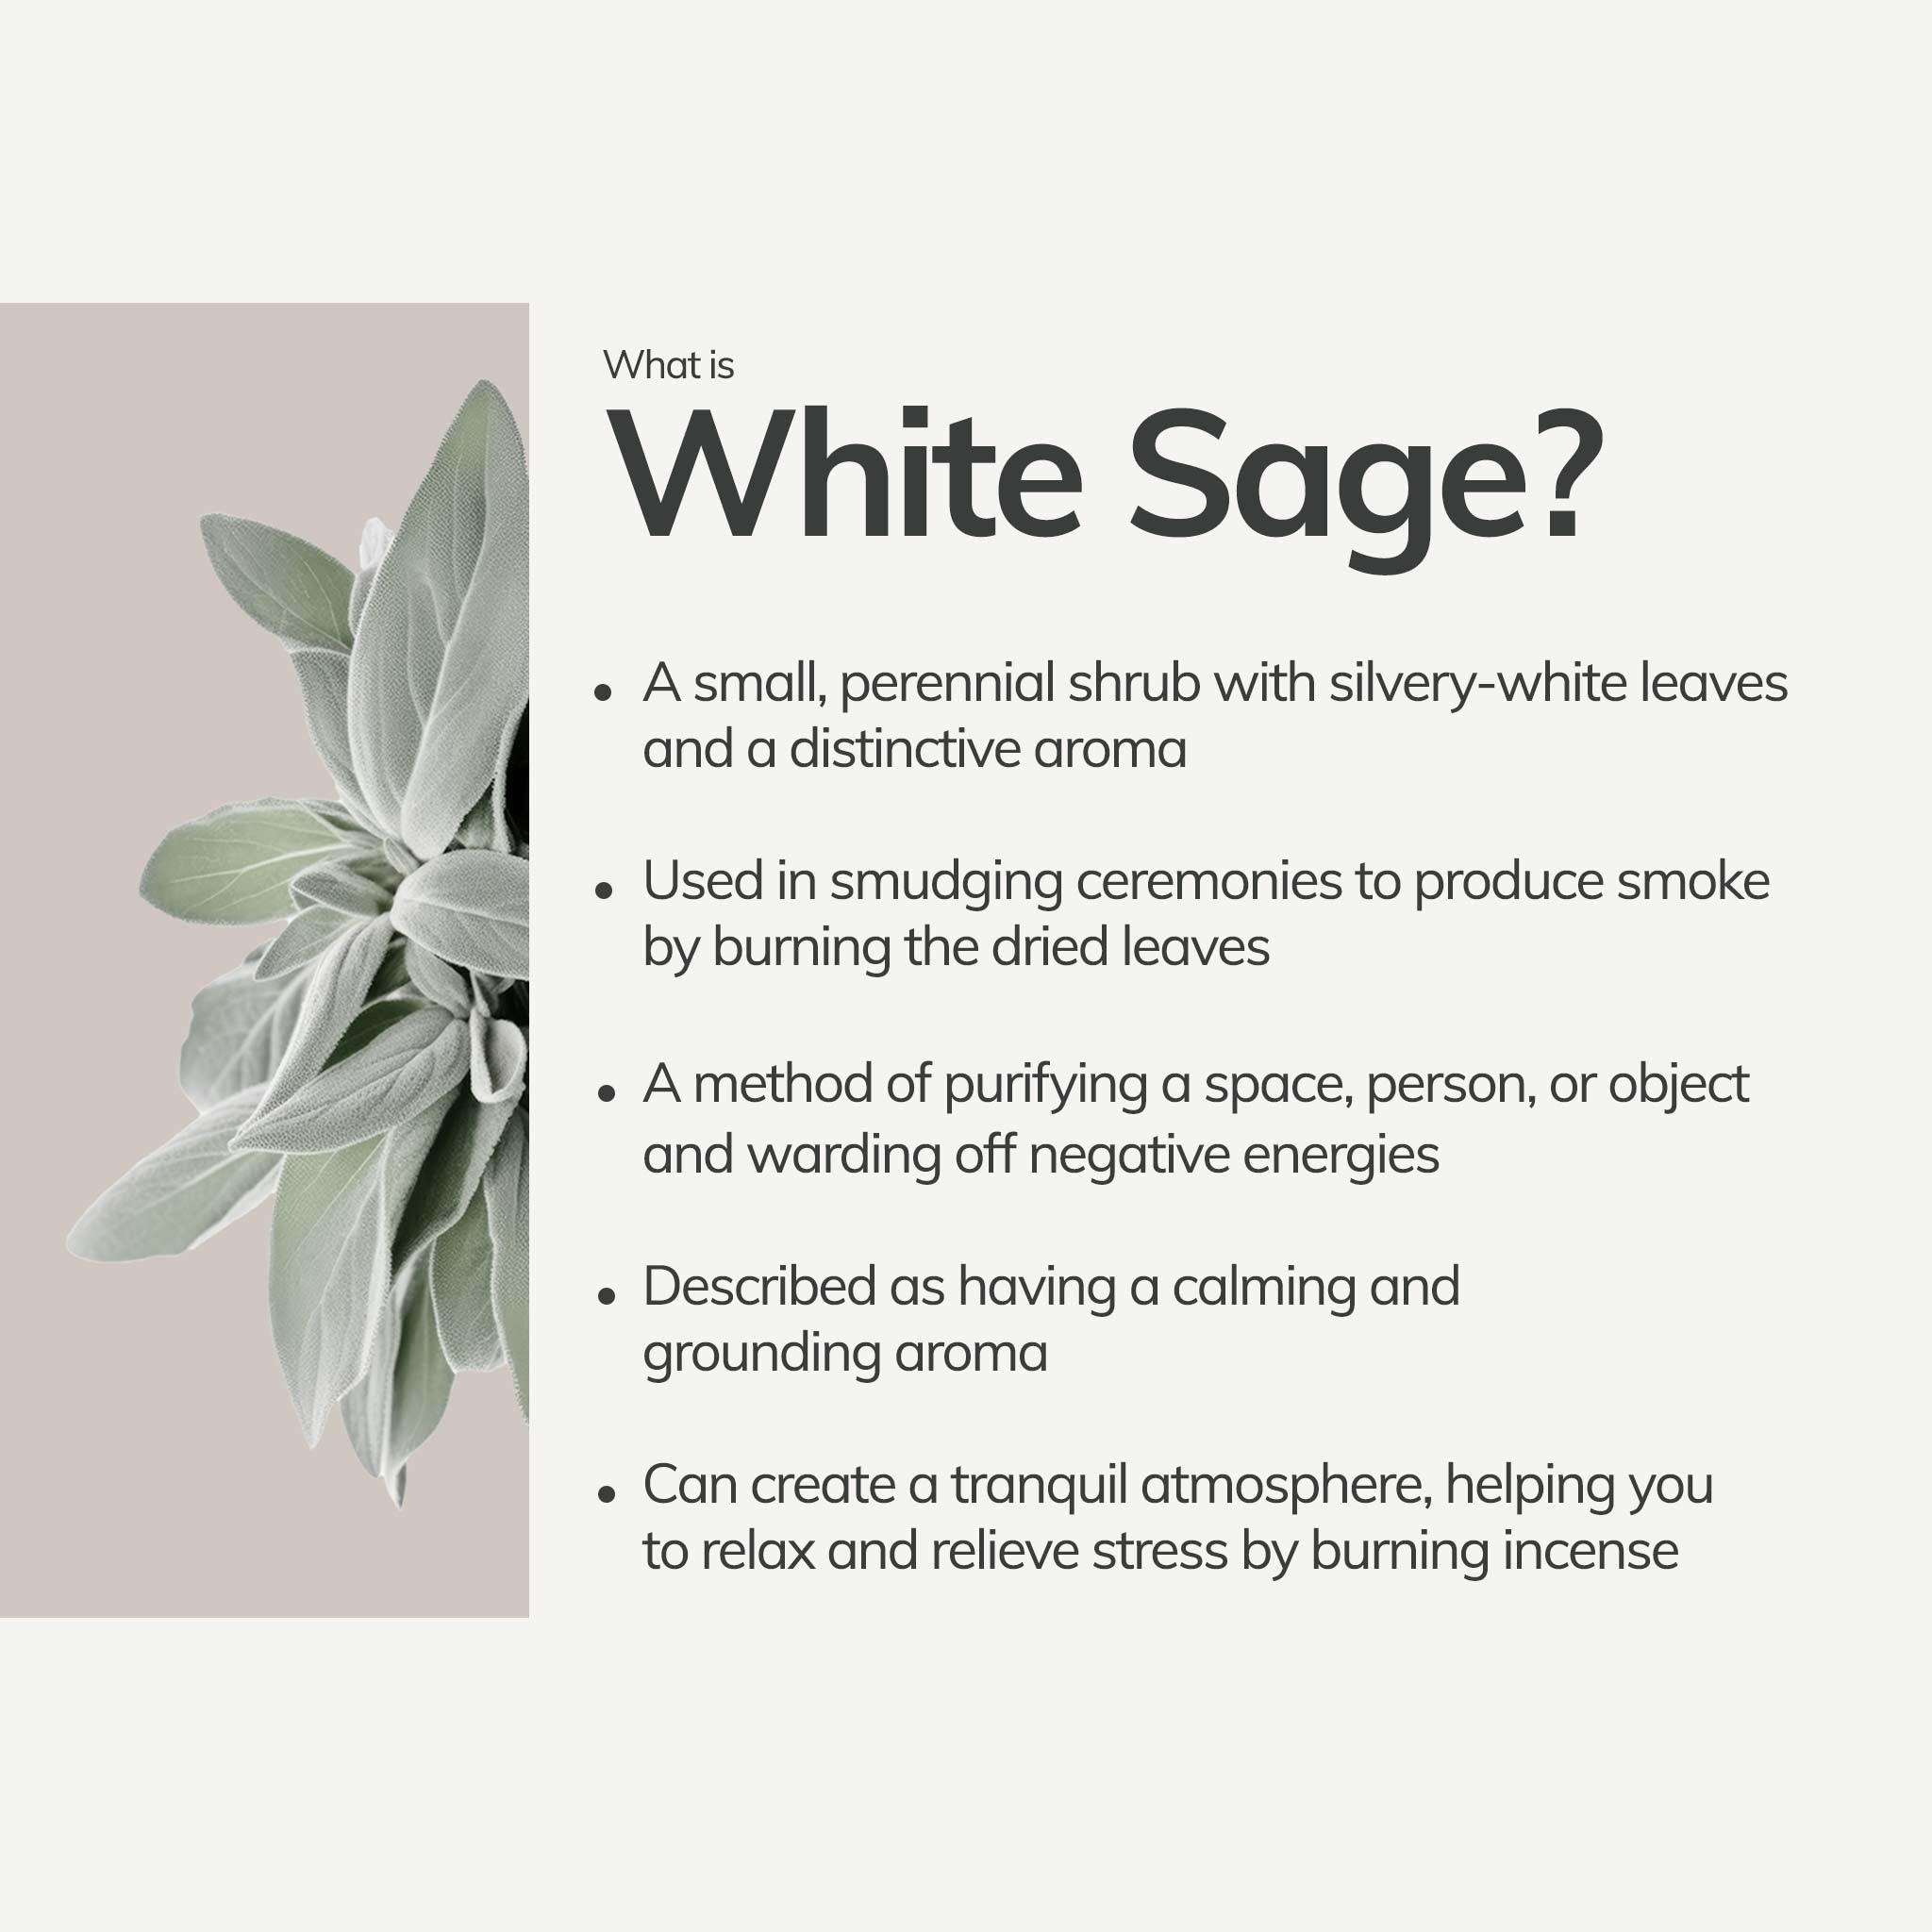 Left: white sage leaves; Right: bullet list telling what is white sage used for.